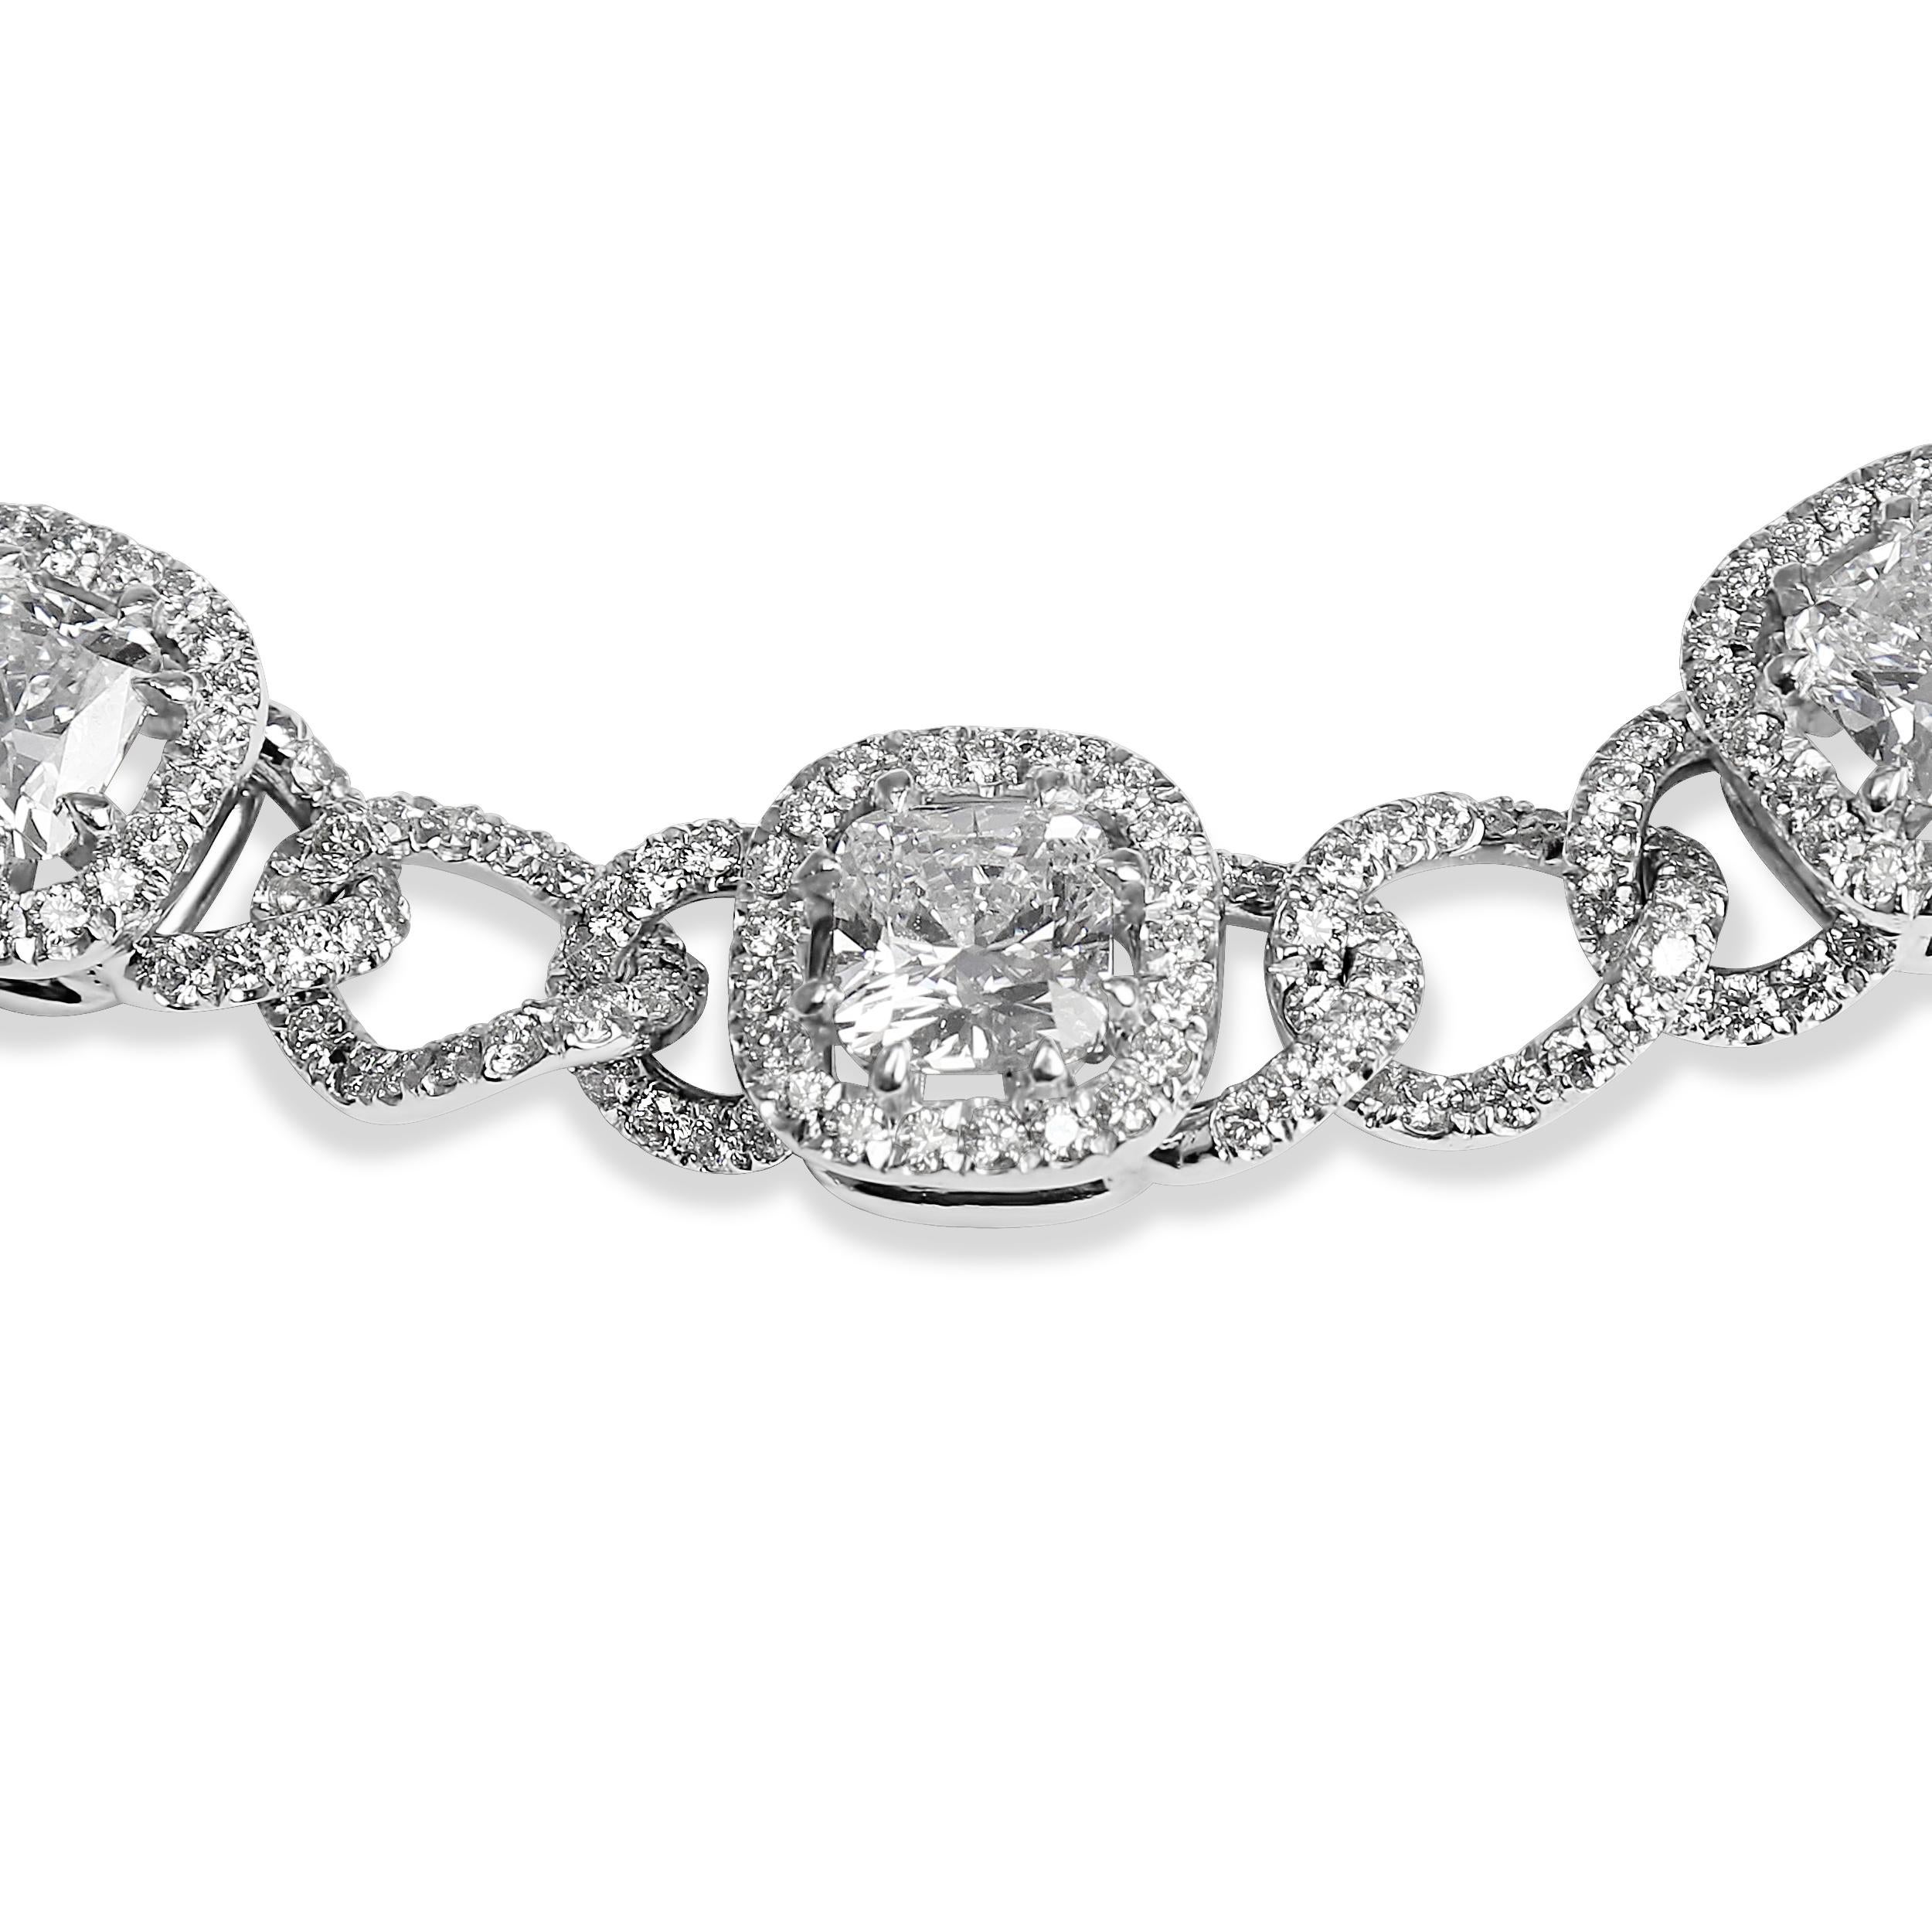 This gorgeous pave curb link bracelet is right on trend and is the perfect addition to your jewelry collection! Beautiful on its own or stacked with your favorite tennis bracelet, you'll wear this exquisitely crafted platinum bracelet for every